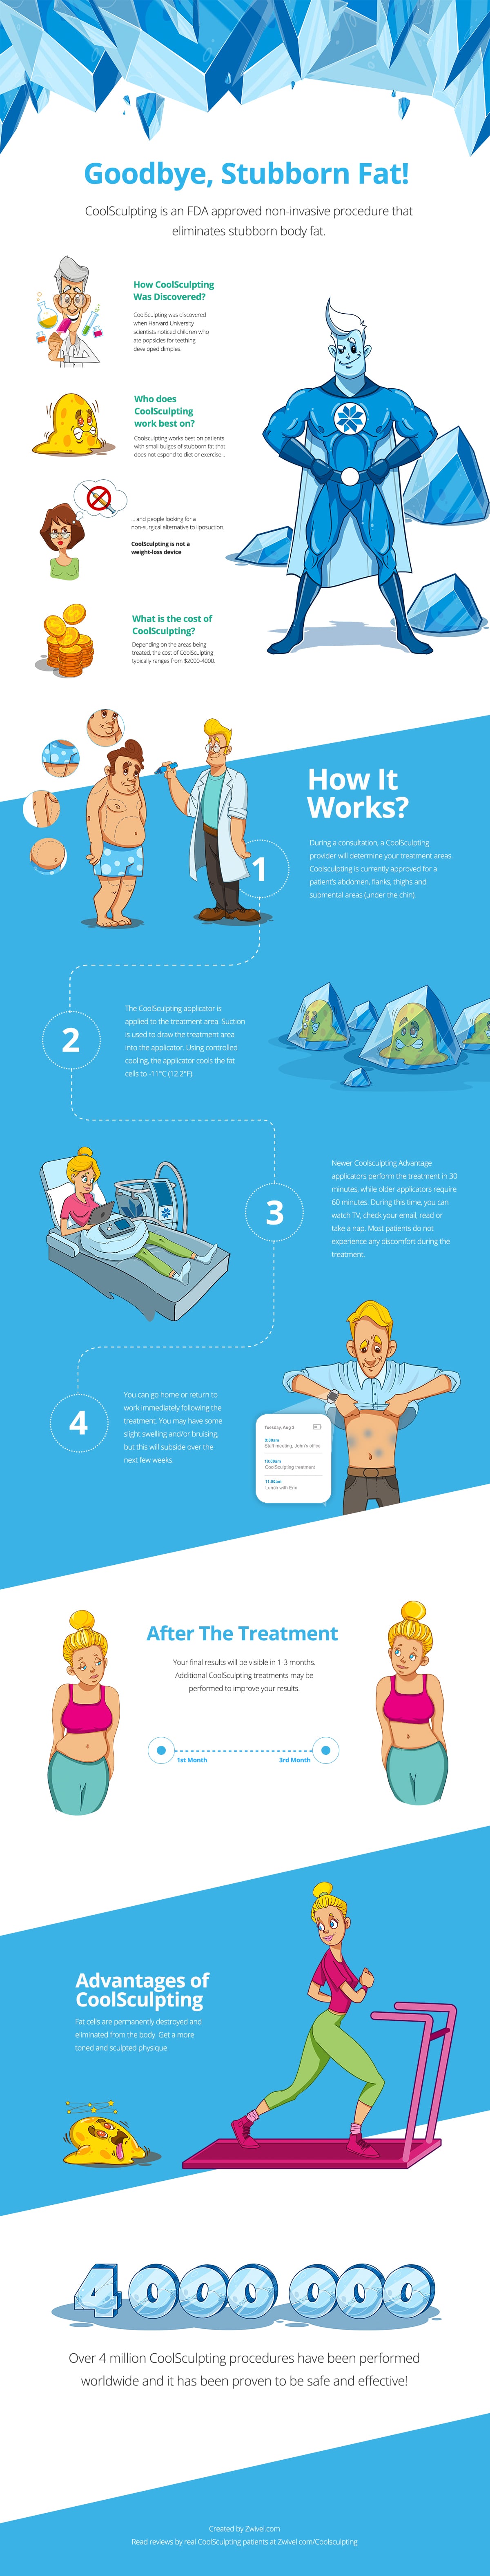 zwivel coolsculpting infographic